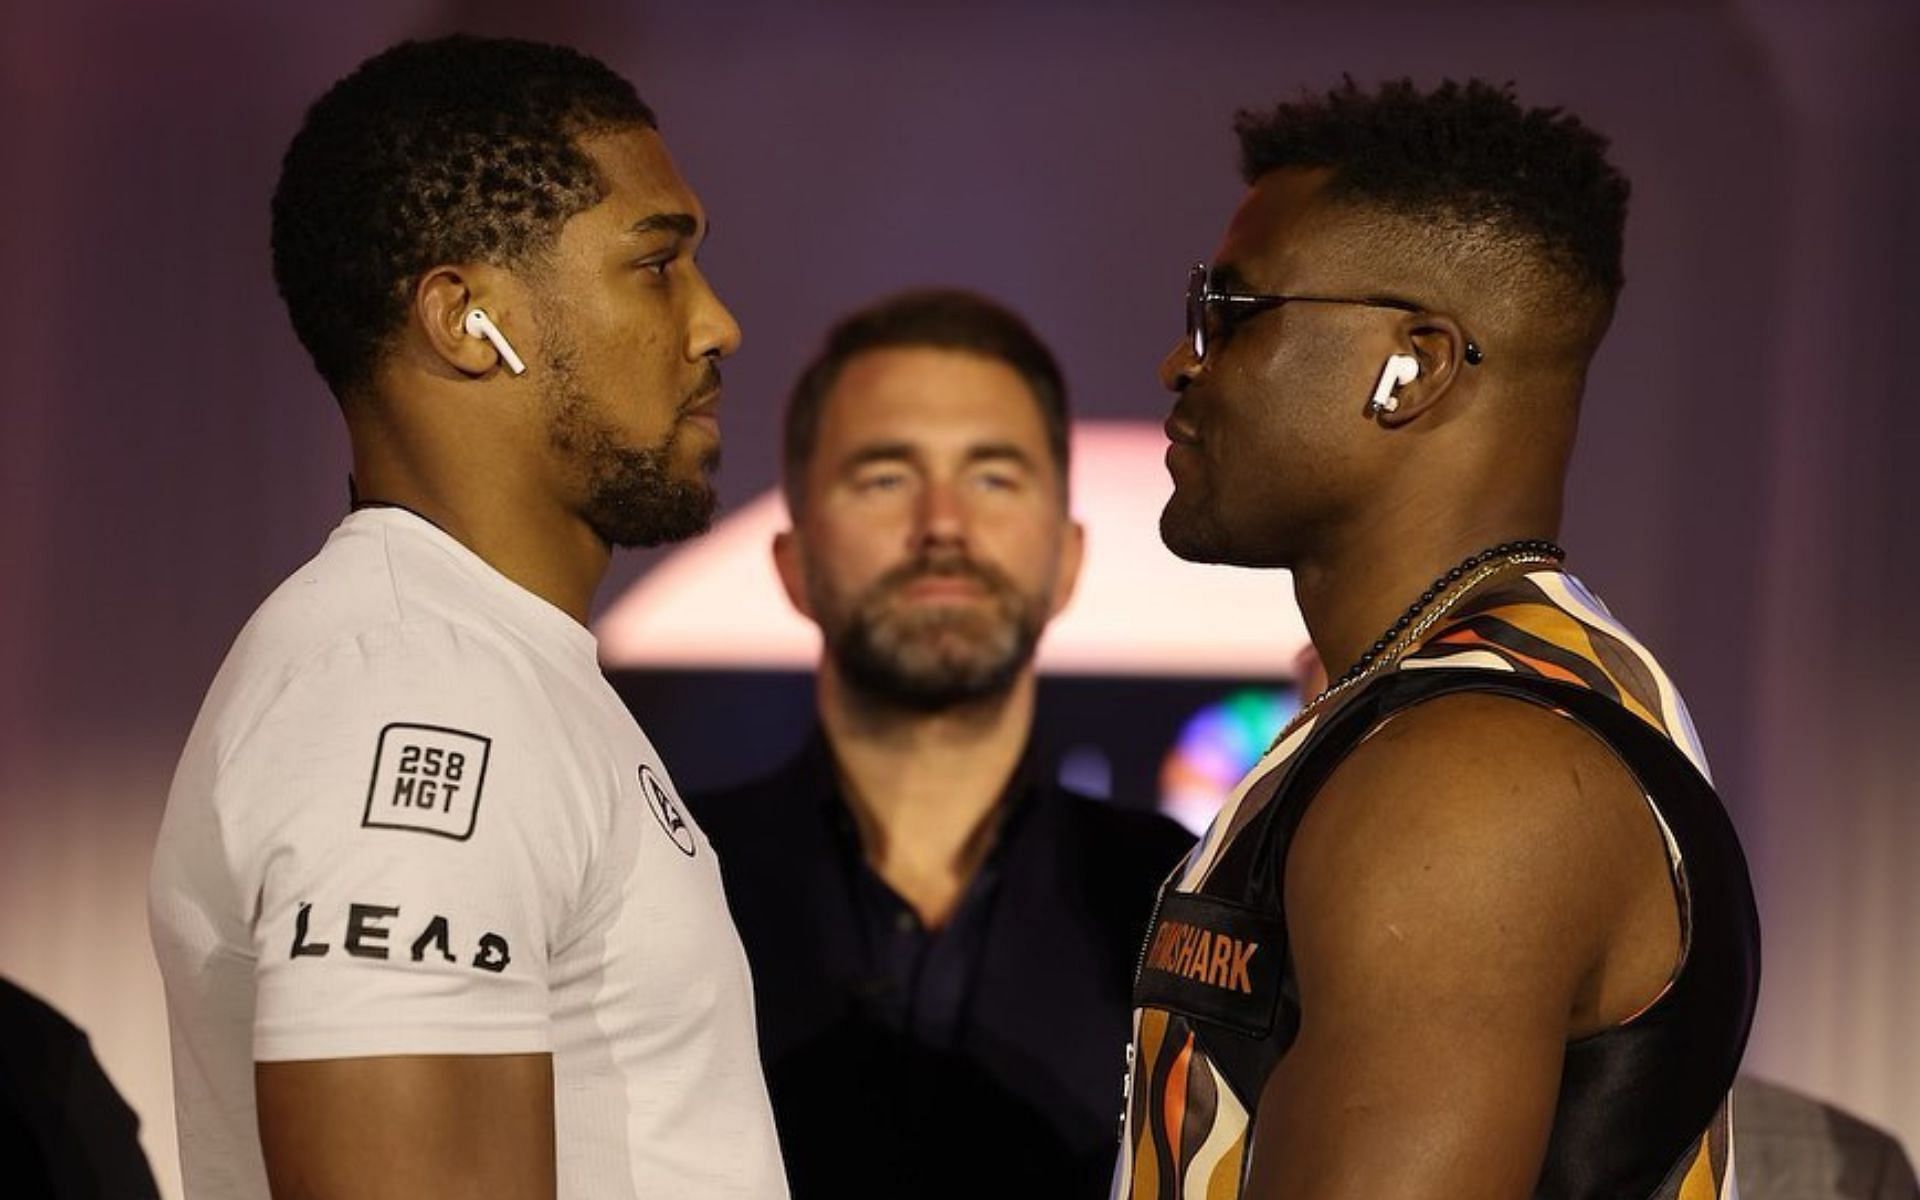 Anthony Joshua (left) anf Francis Ngannou (right) competed in a boxing match on March 8 [Image credits: @daznboxing on Instagram]